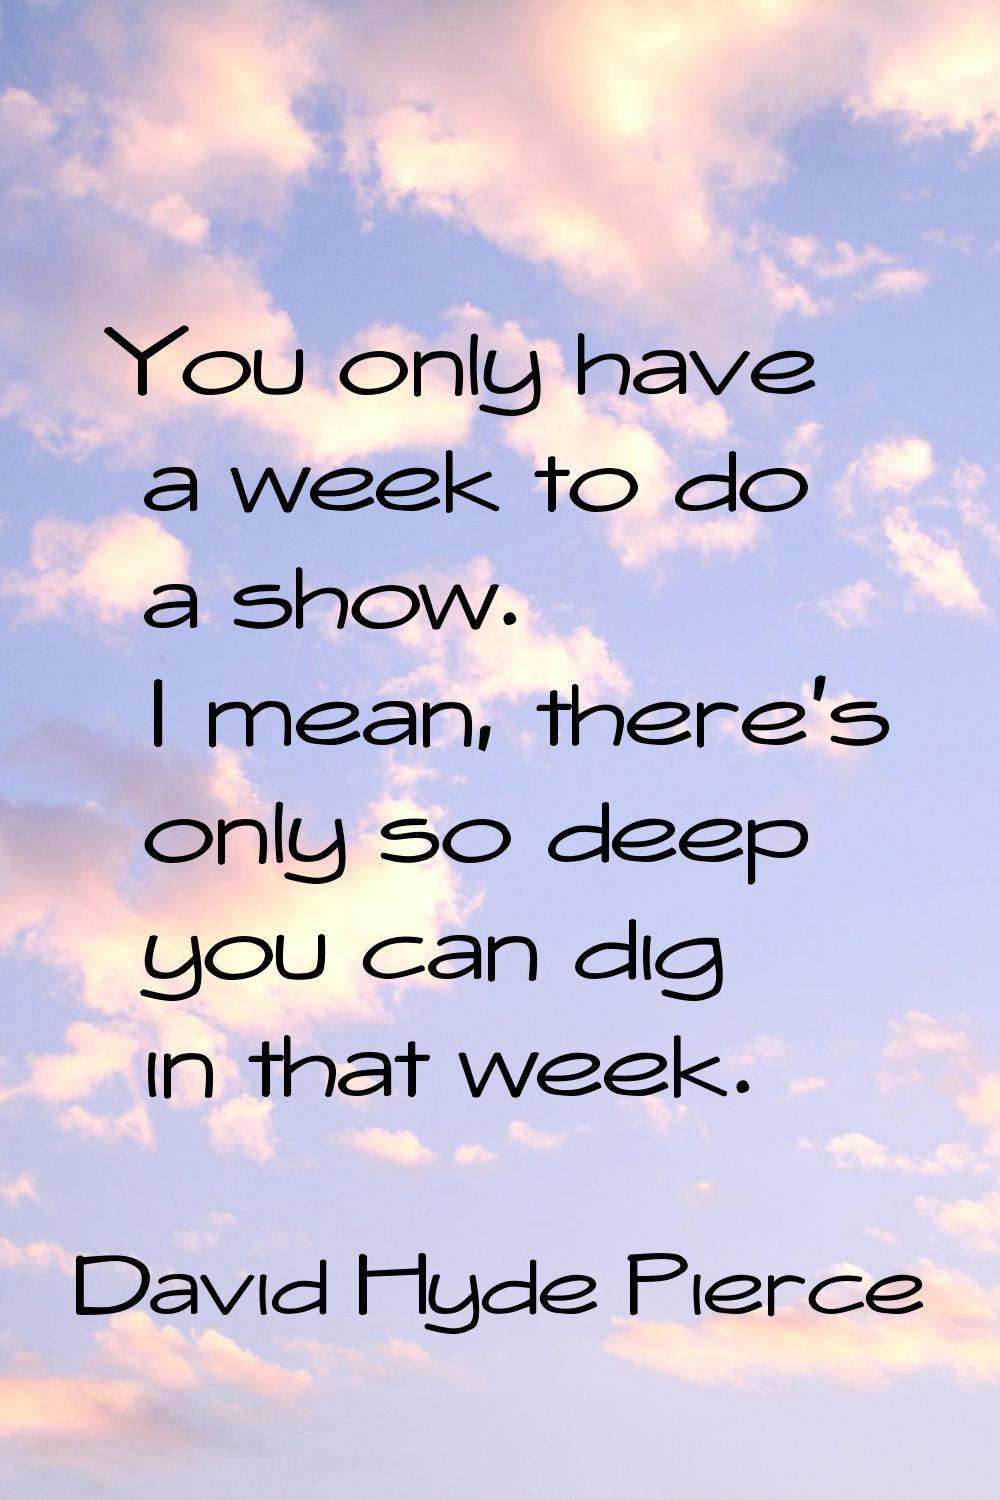 You only have a week to do a show. I mean, there's only so deep you can dig in that week.